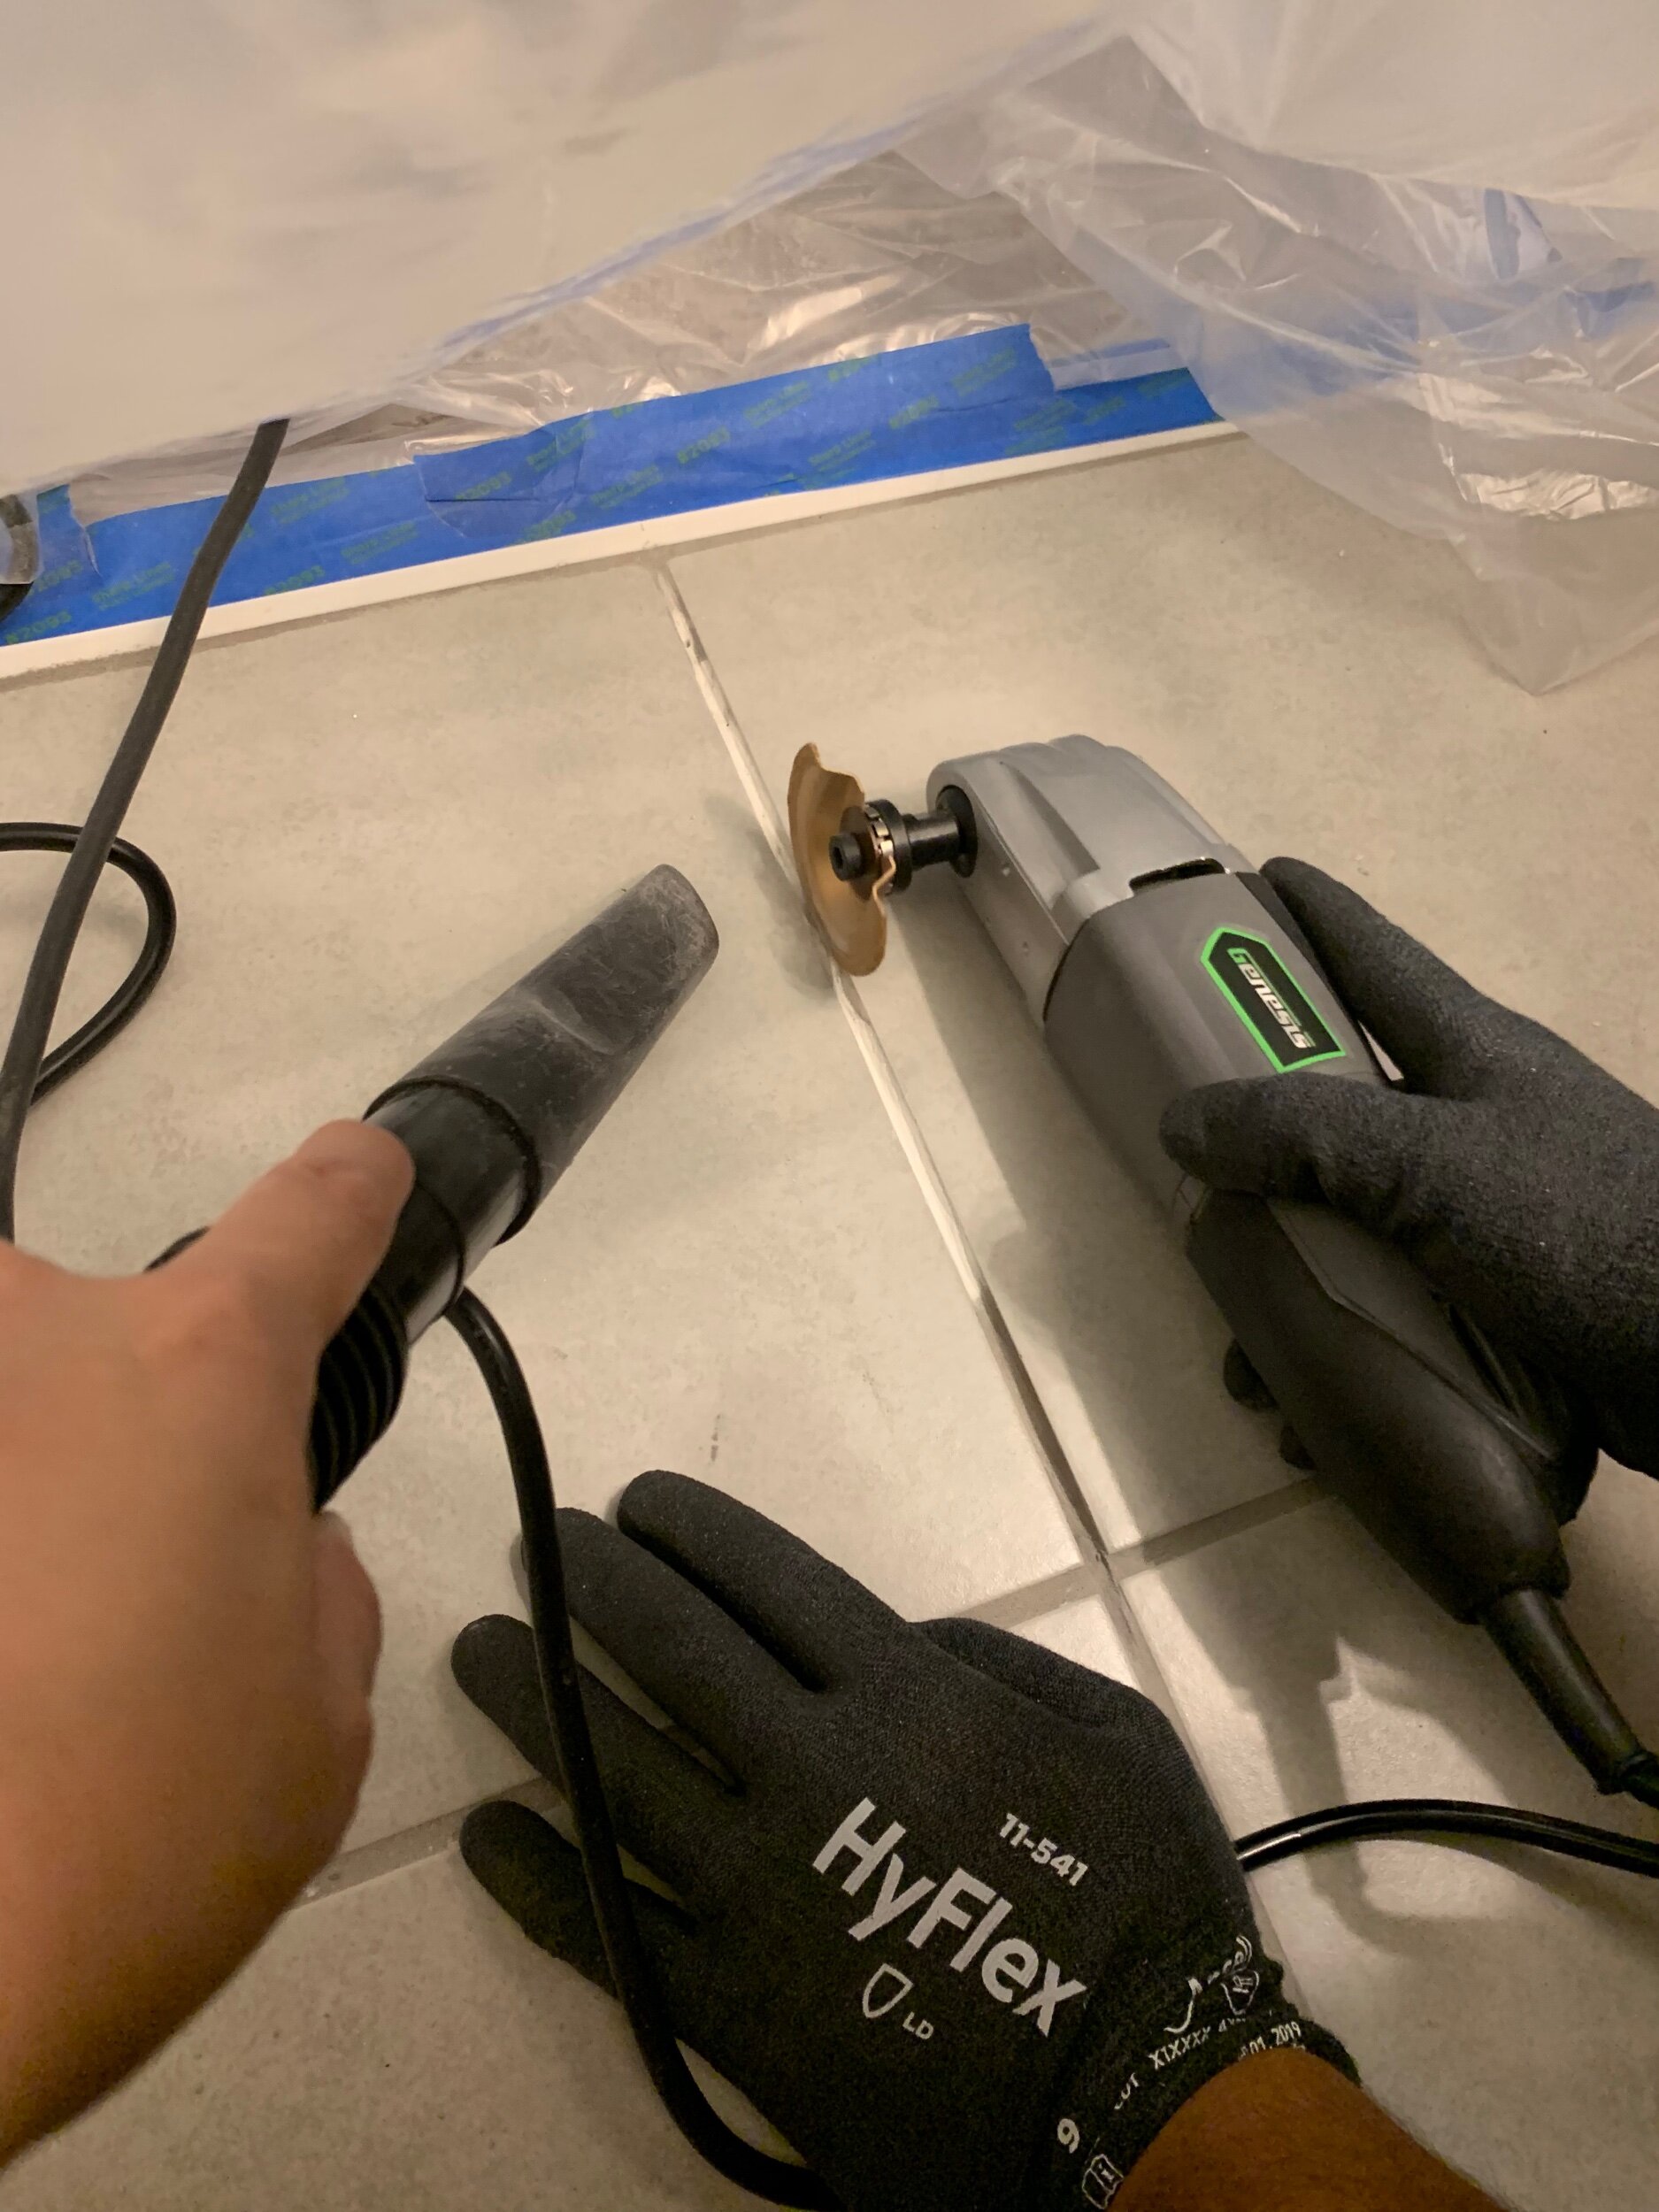 Using the shop vac right next to the oscillating tool helps capture more dust.